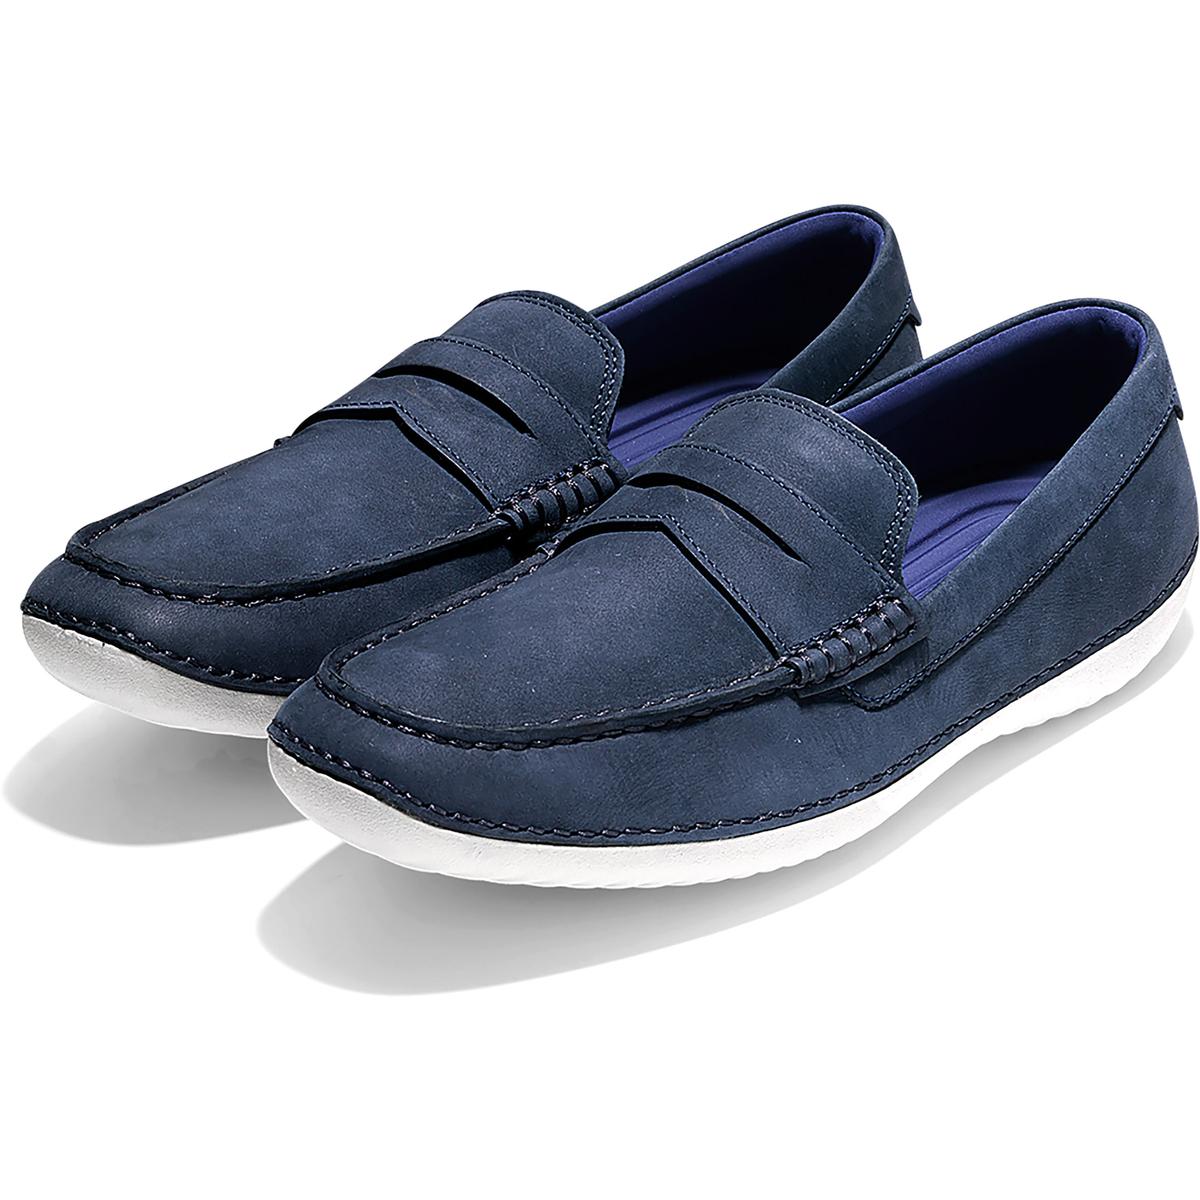 Cole Haan Mens MotoGrand Nubuck Slip On Driving Moccasins Shoes BHFO ...